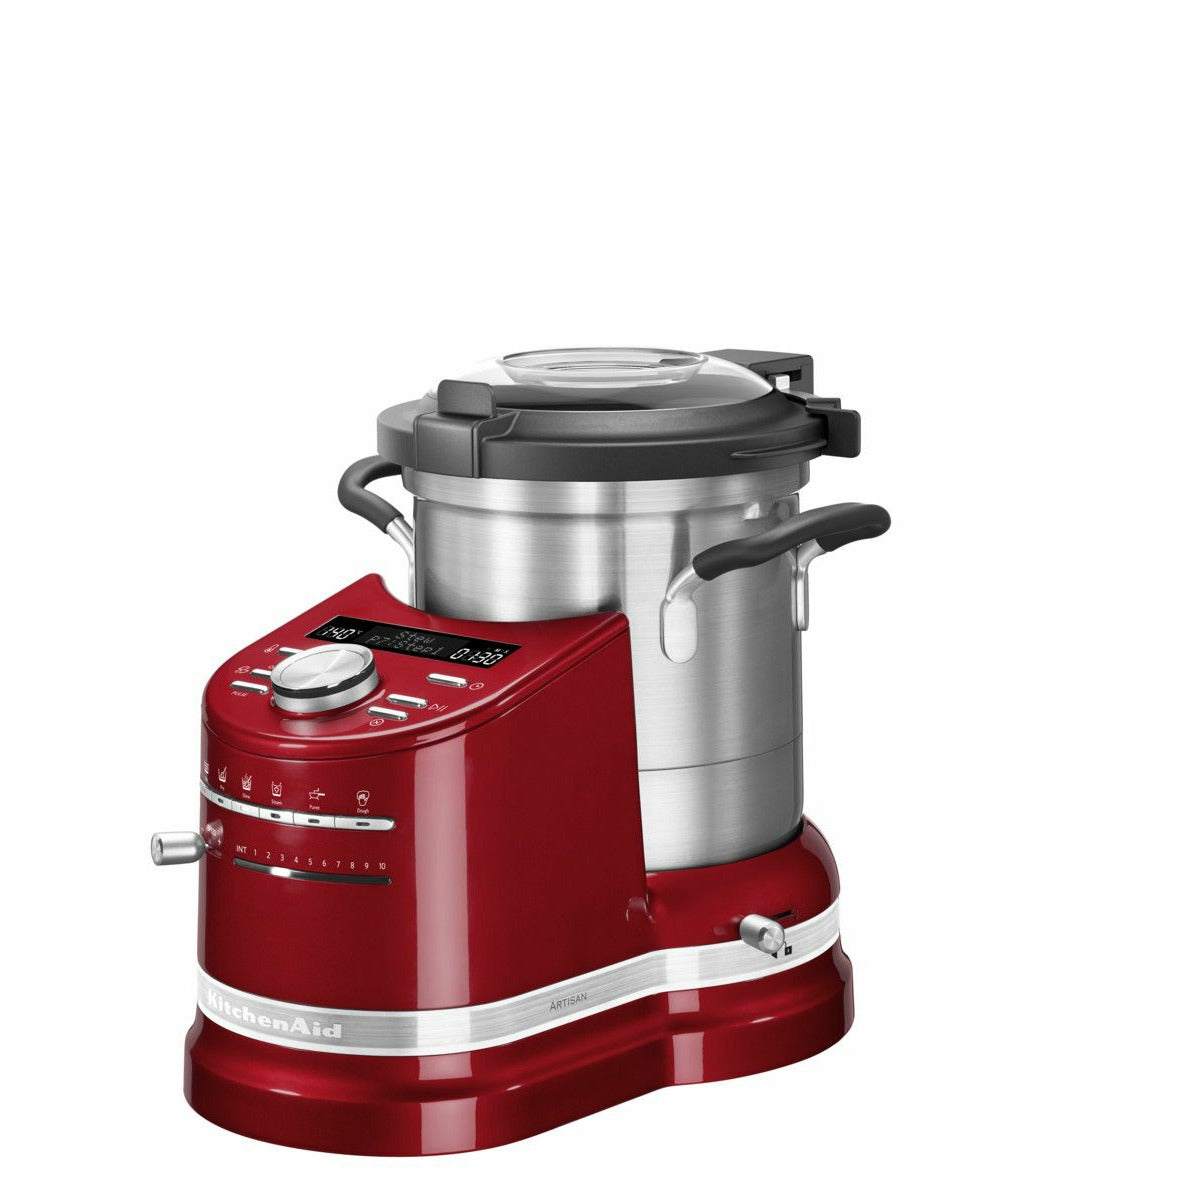 Kitchen Aid 5 Kcf0104 Artisan Cook Processor, Empire Red